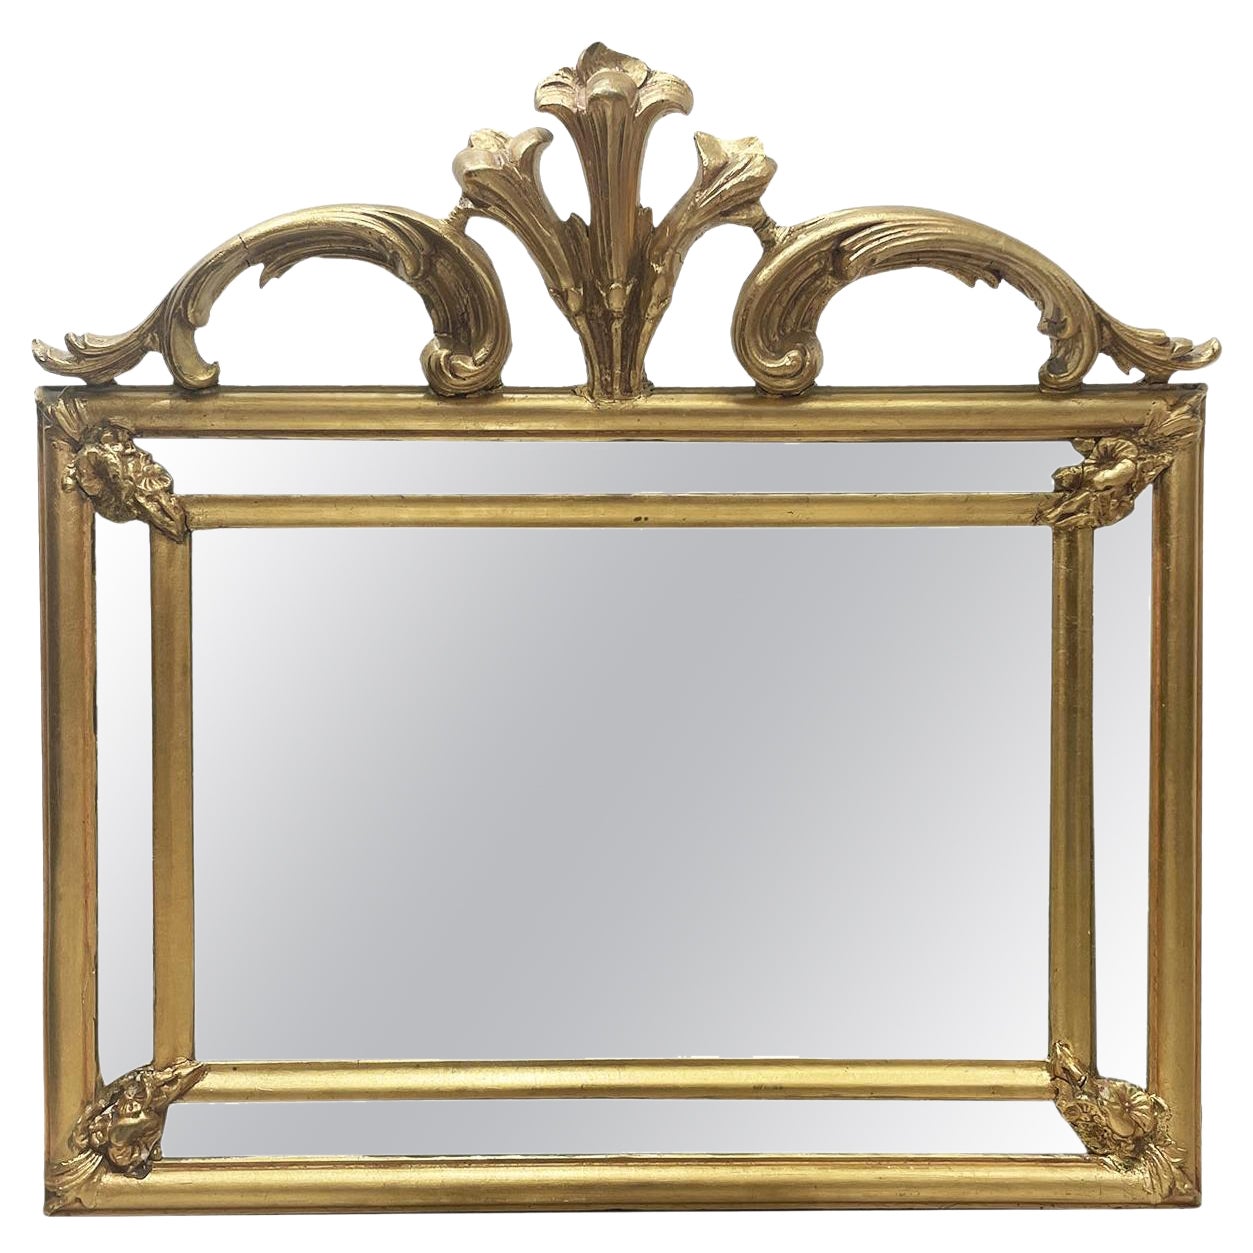 19th Century French Antique Gilded Pinewood Wall Glass Mirror